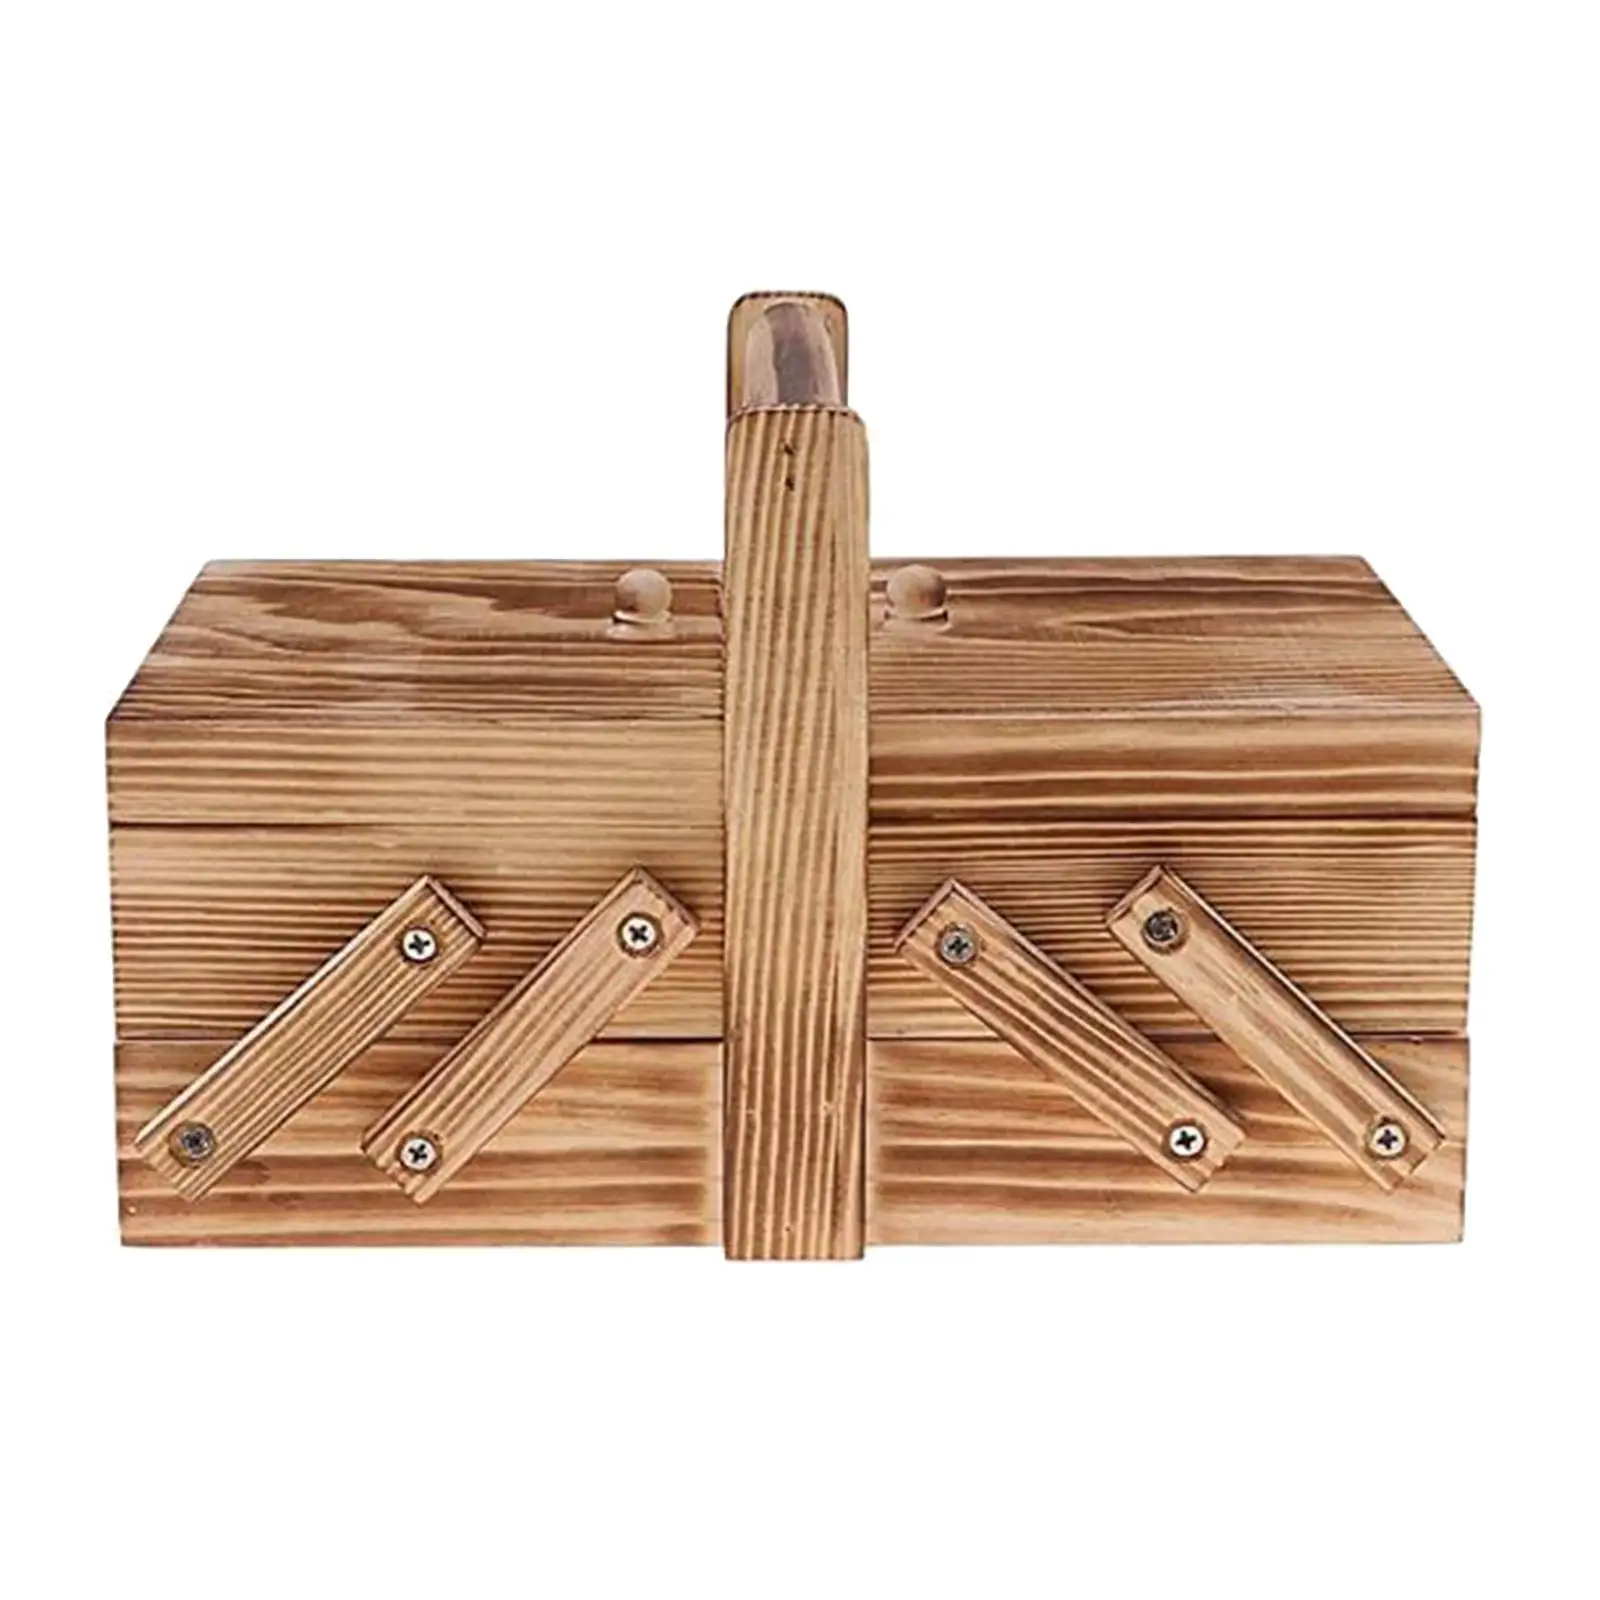 Wooden Sewing box  Thread Scissors Stitching Sew Basket Organizer Jewelry Boxes Sewing Supplies Household for Beginners